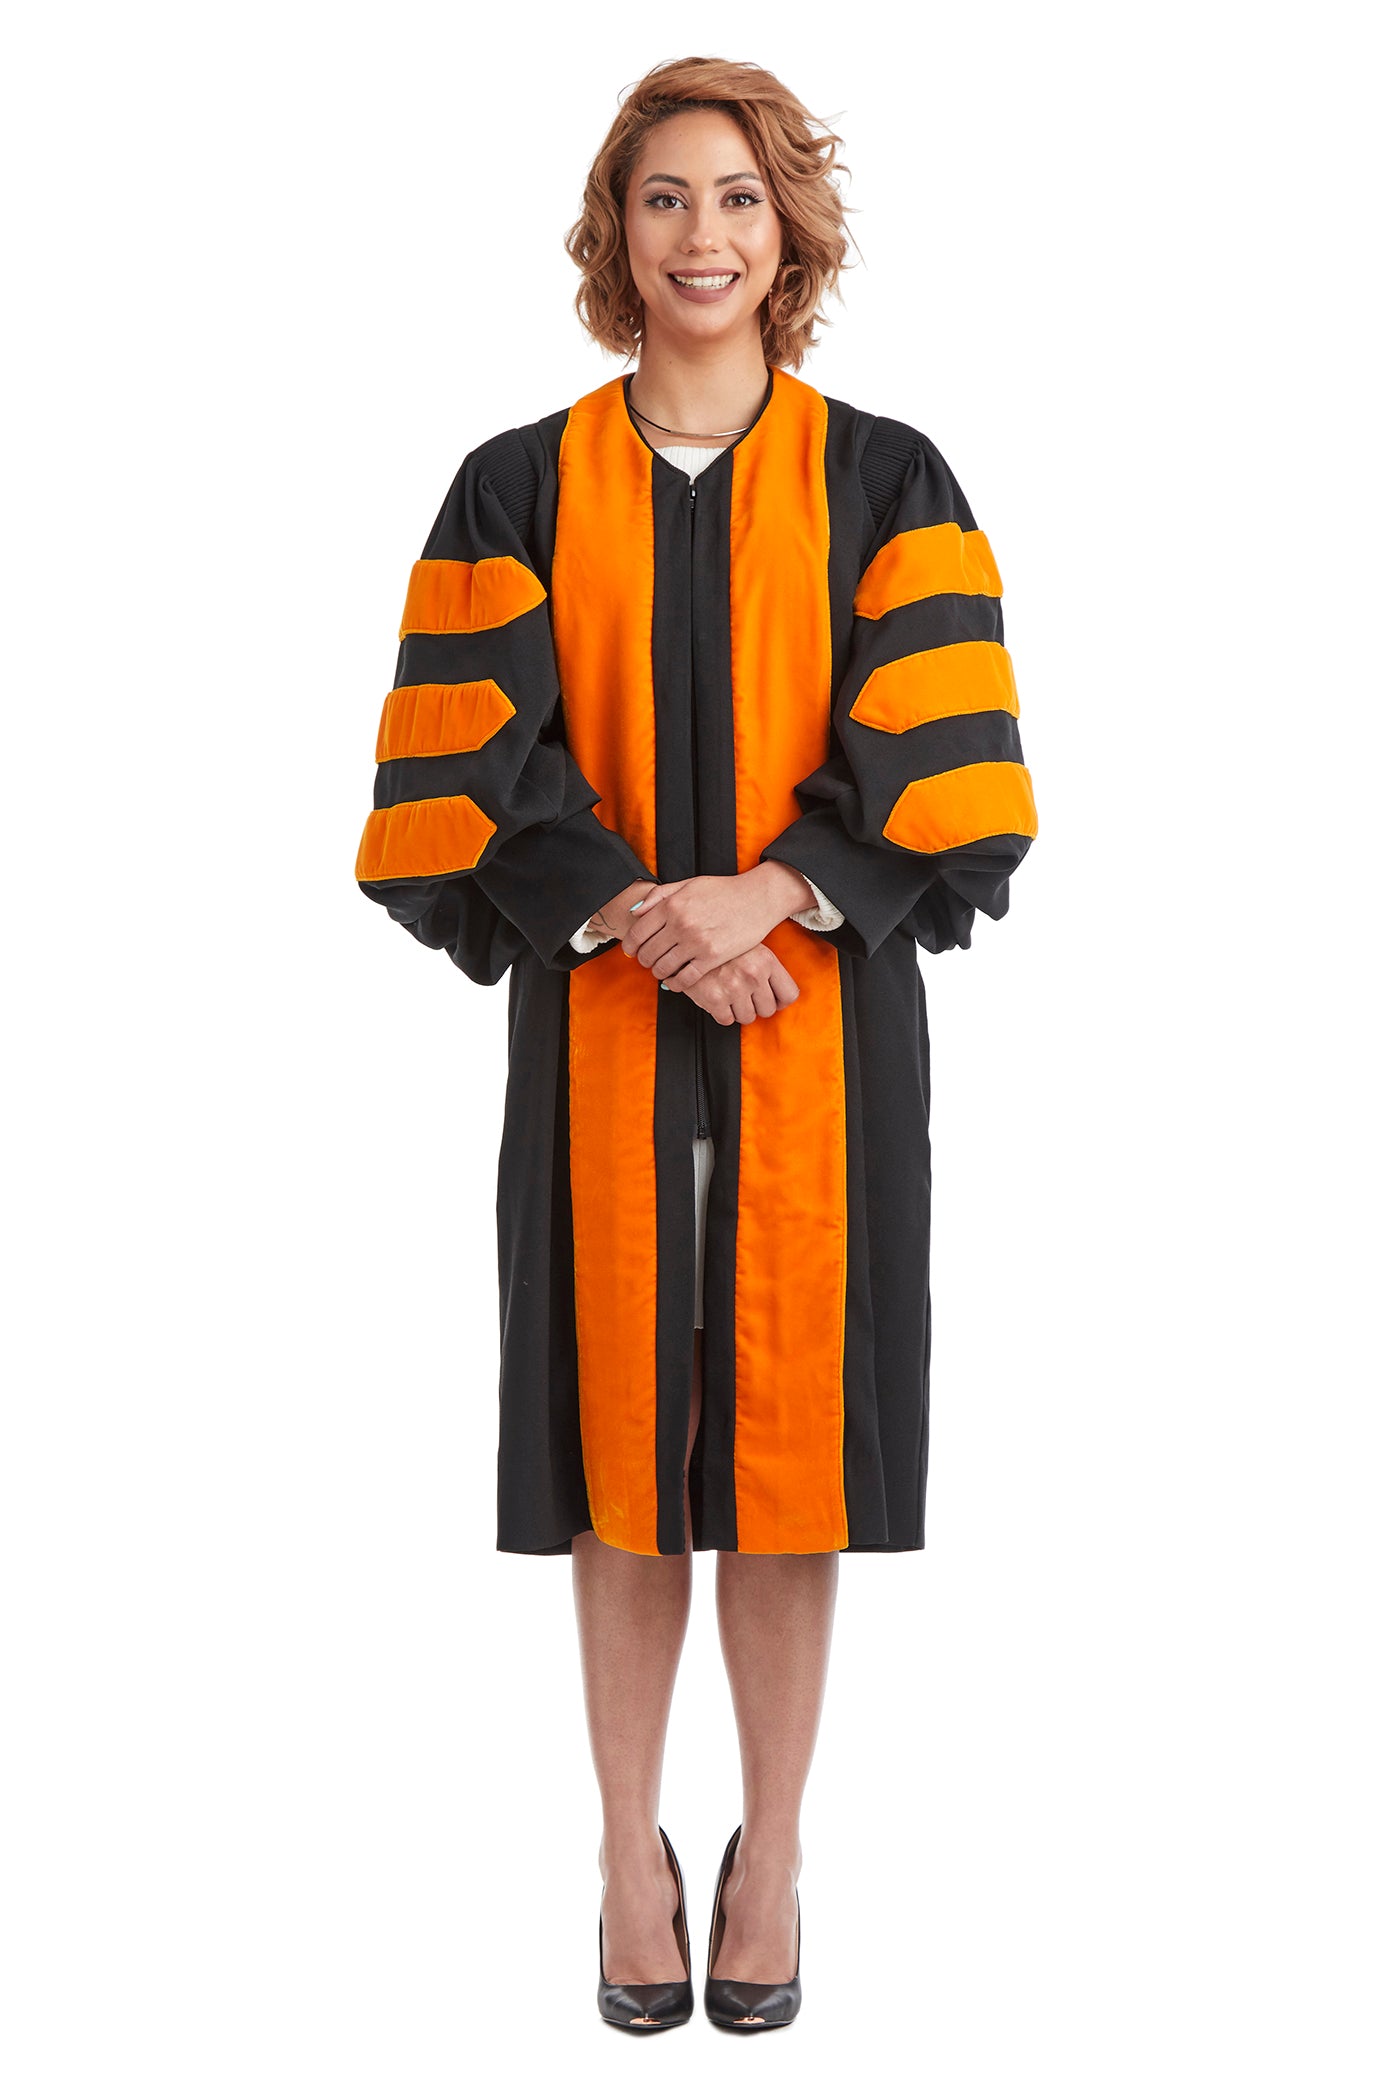 Deluxe Doctoral Graduation Gown with Gold Piping and Doctoral Tam Pack –  MyGradDay